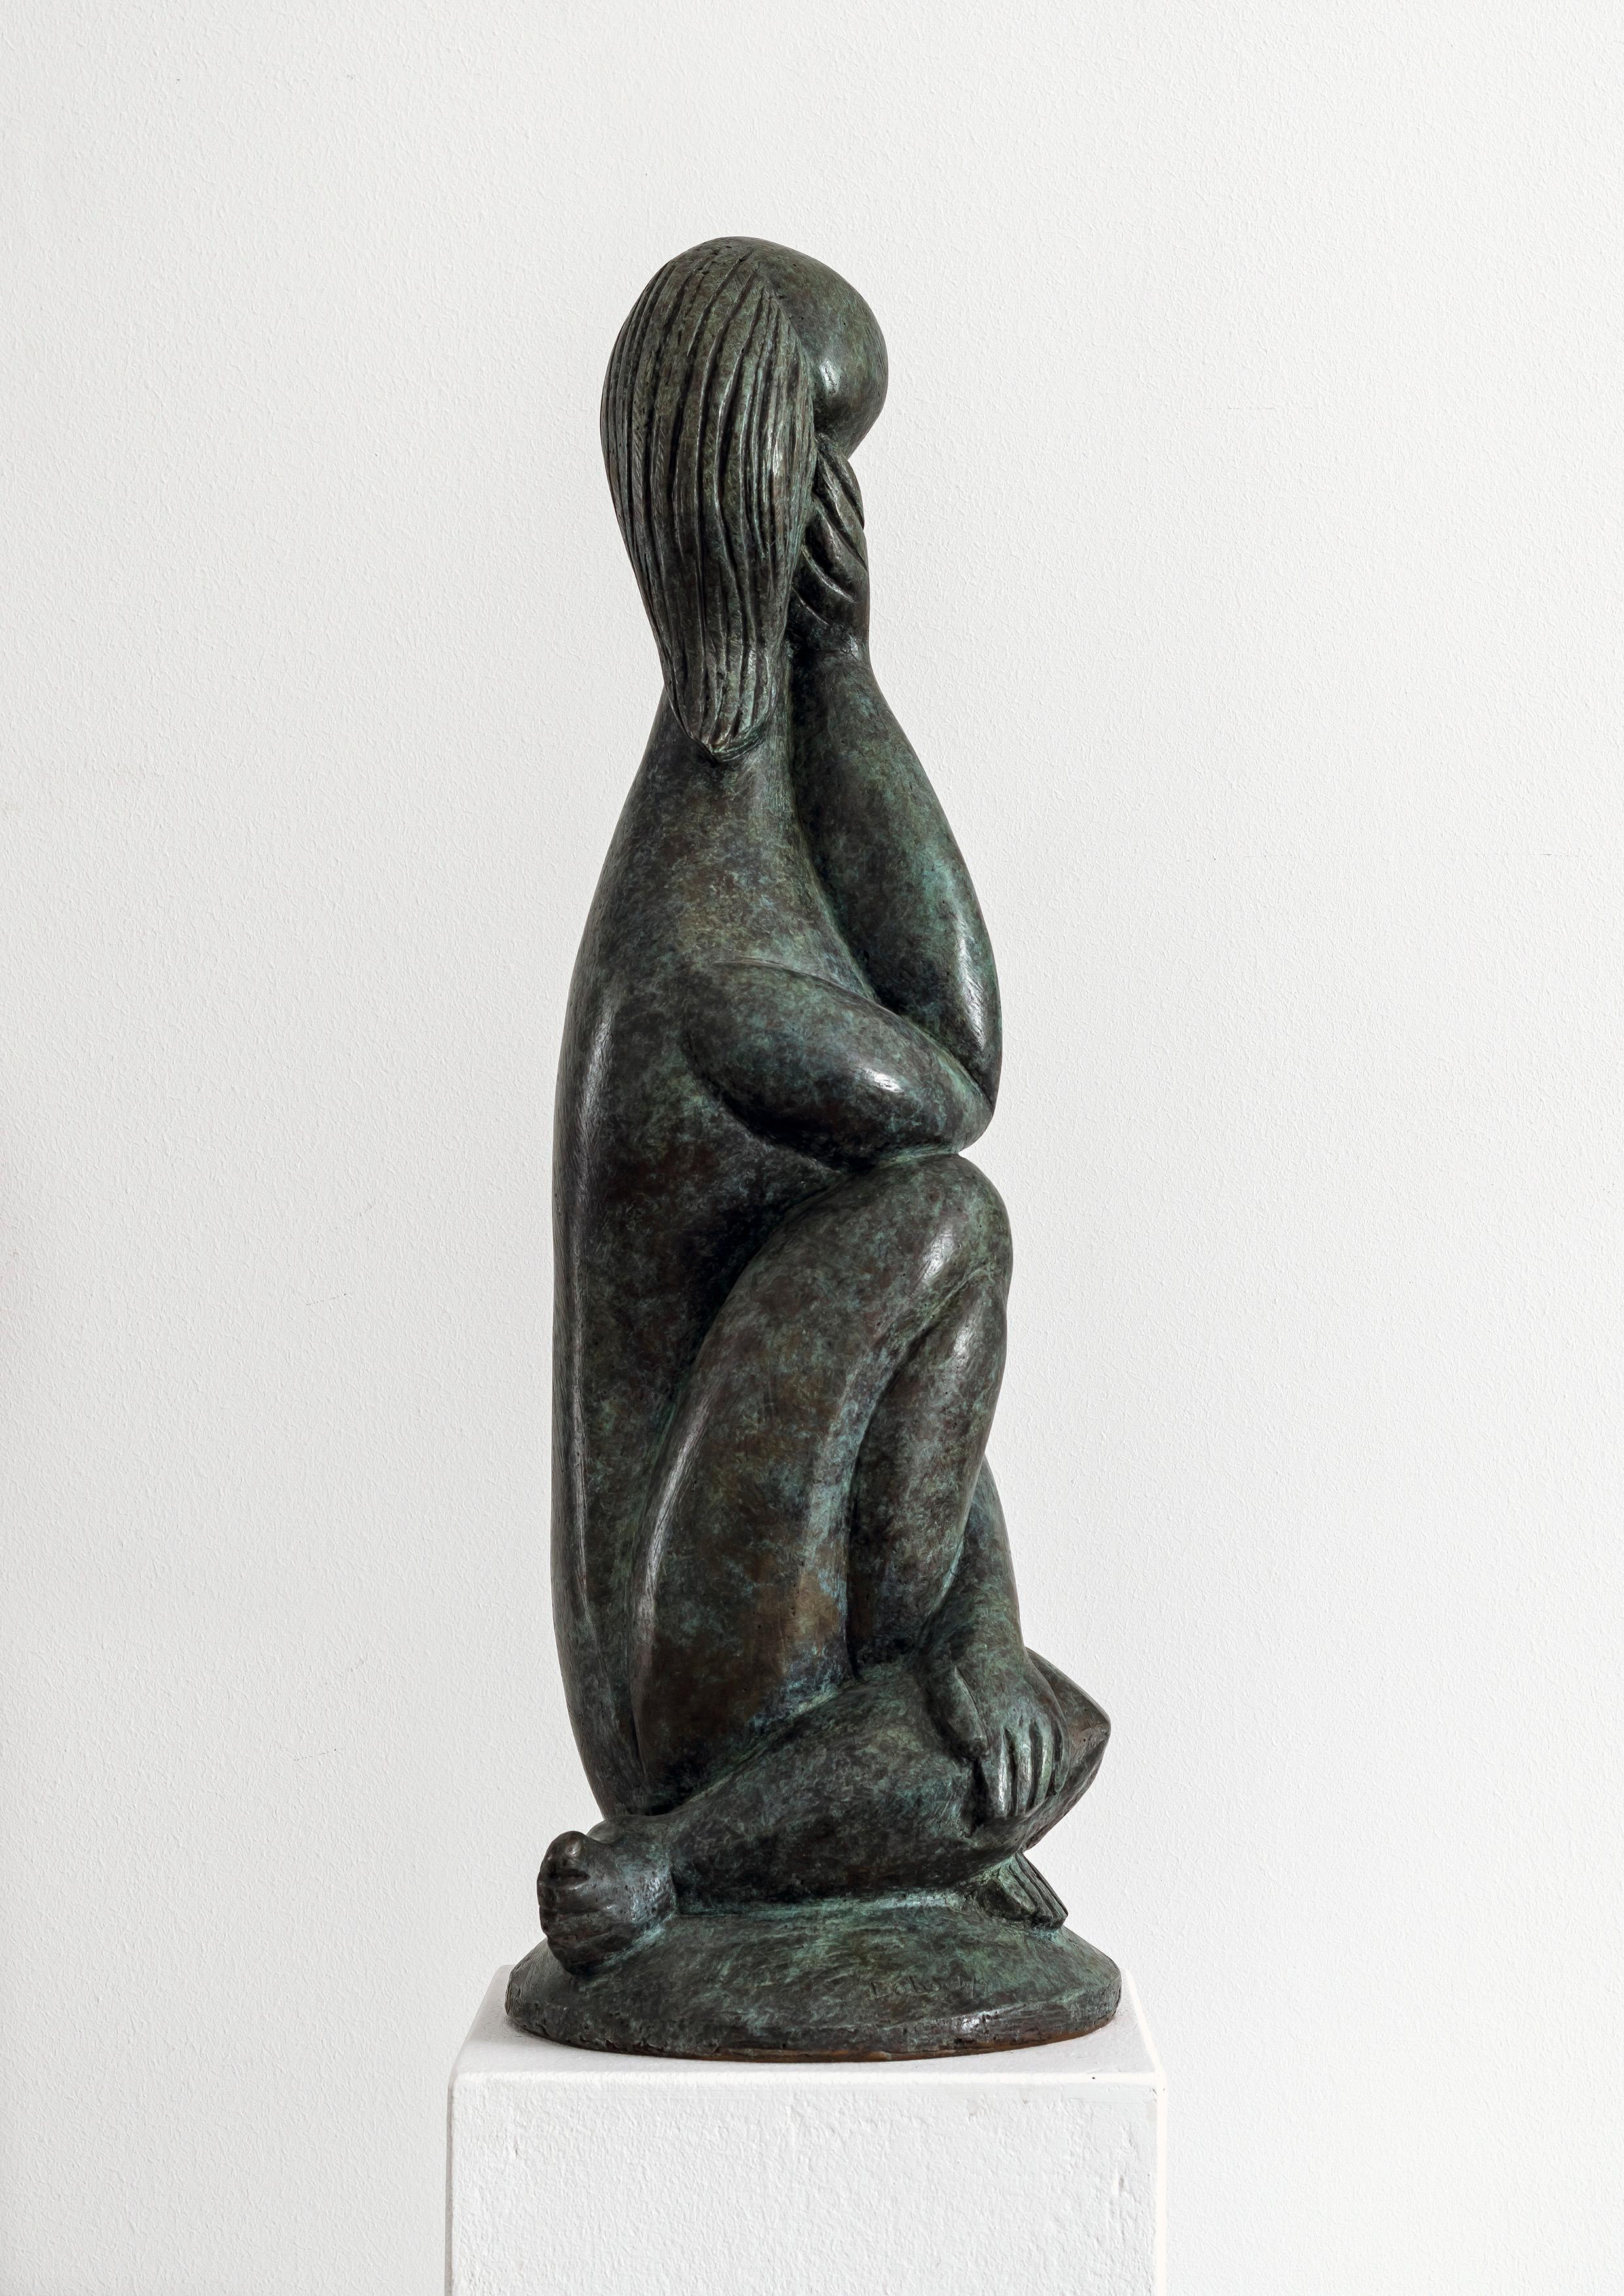 In the choice of his motifs, Baltasar Lobo turns to the wealth of ancient legends and pays particular homage to the myth of the woman. His sculptures seek the absolute in the female nude, the roundly modelled forms of which touch upon the boundaries